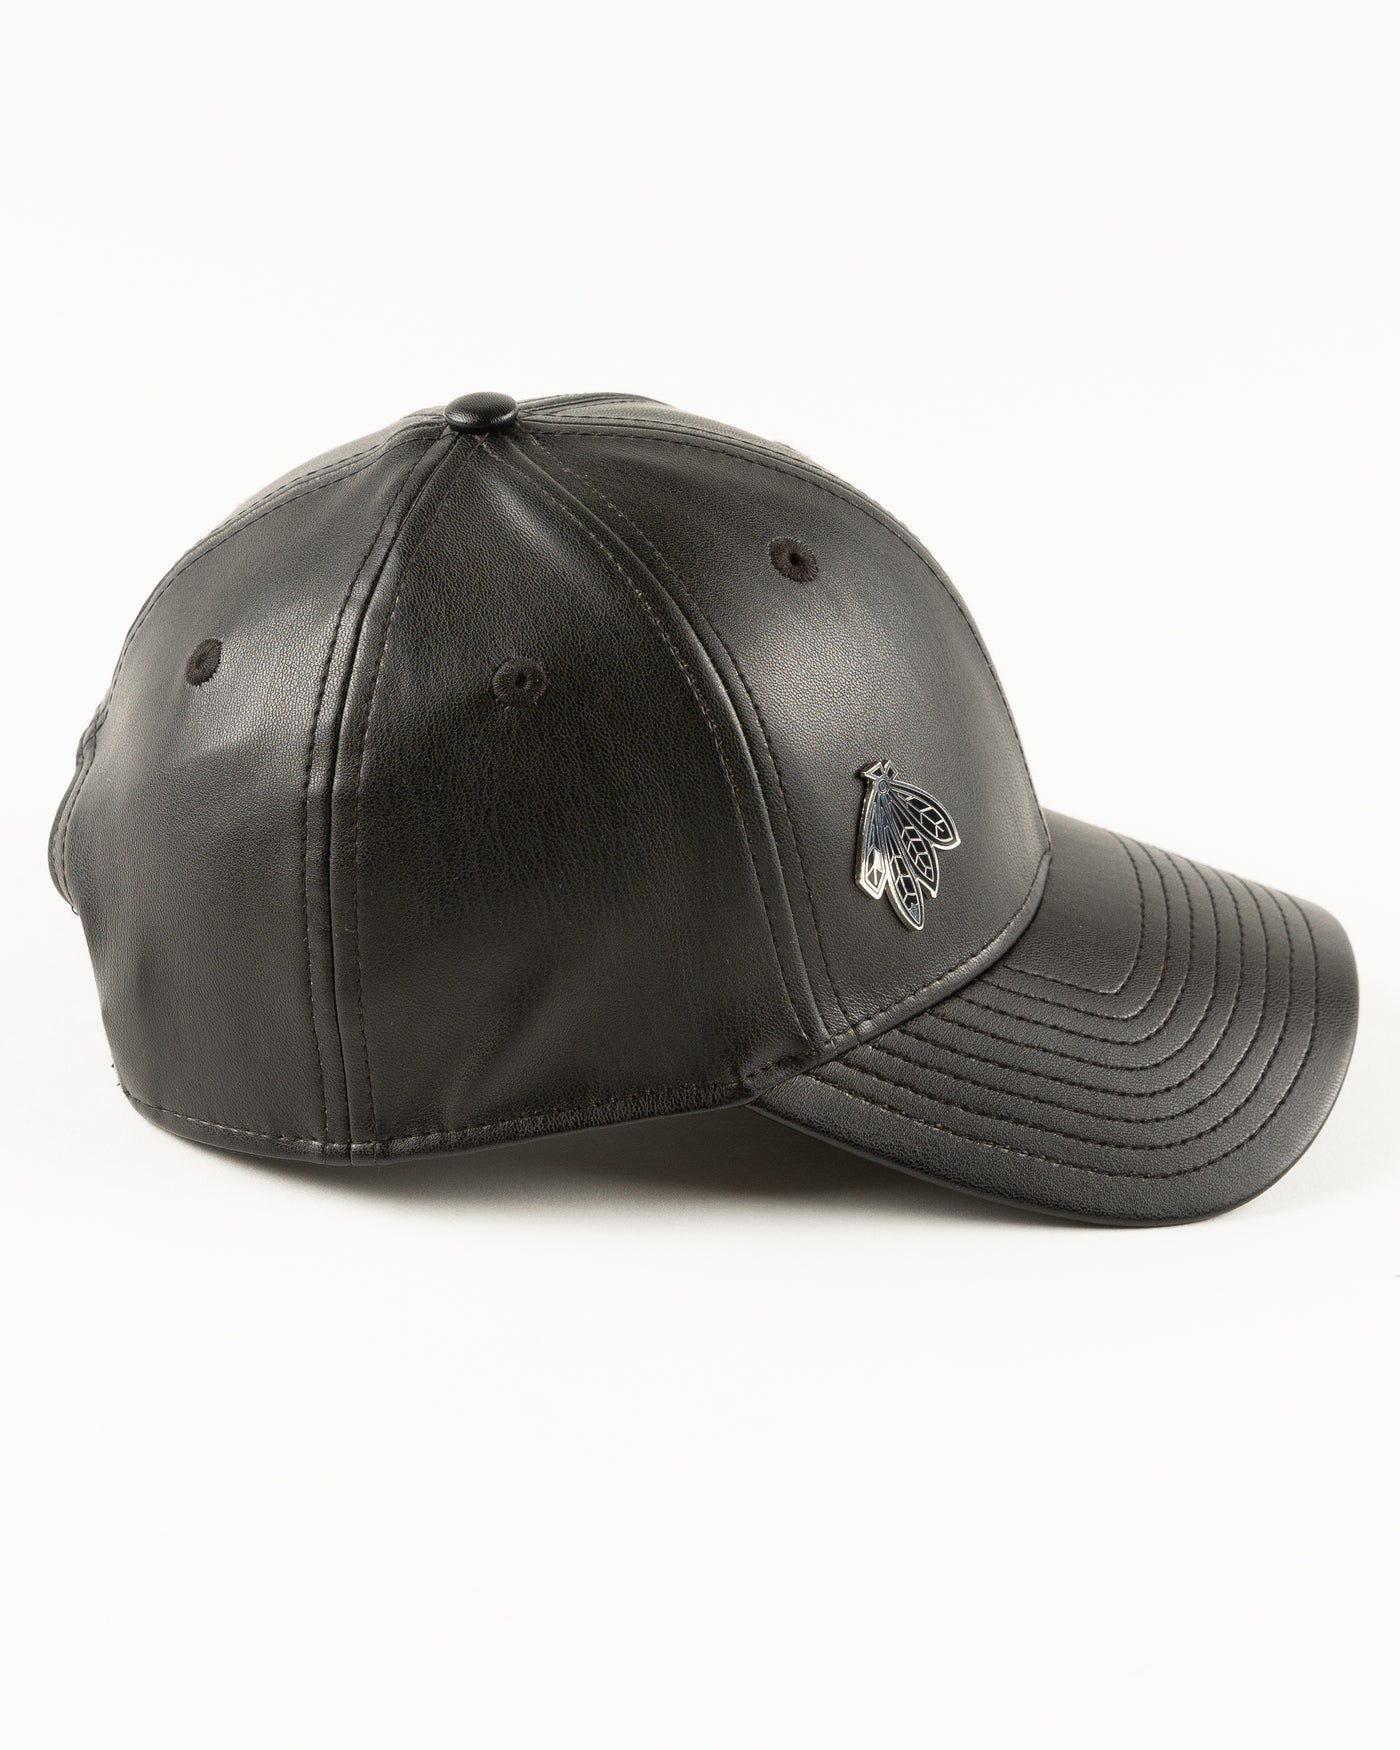 black leather New Era cap with Chicago Blackhawks four feathers logo in silver pin on front - right side lay flat